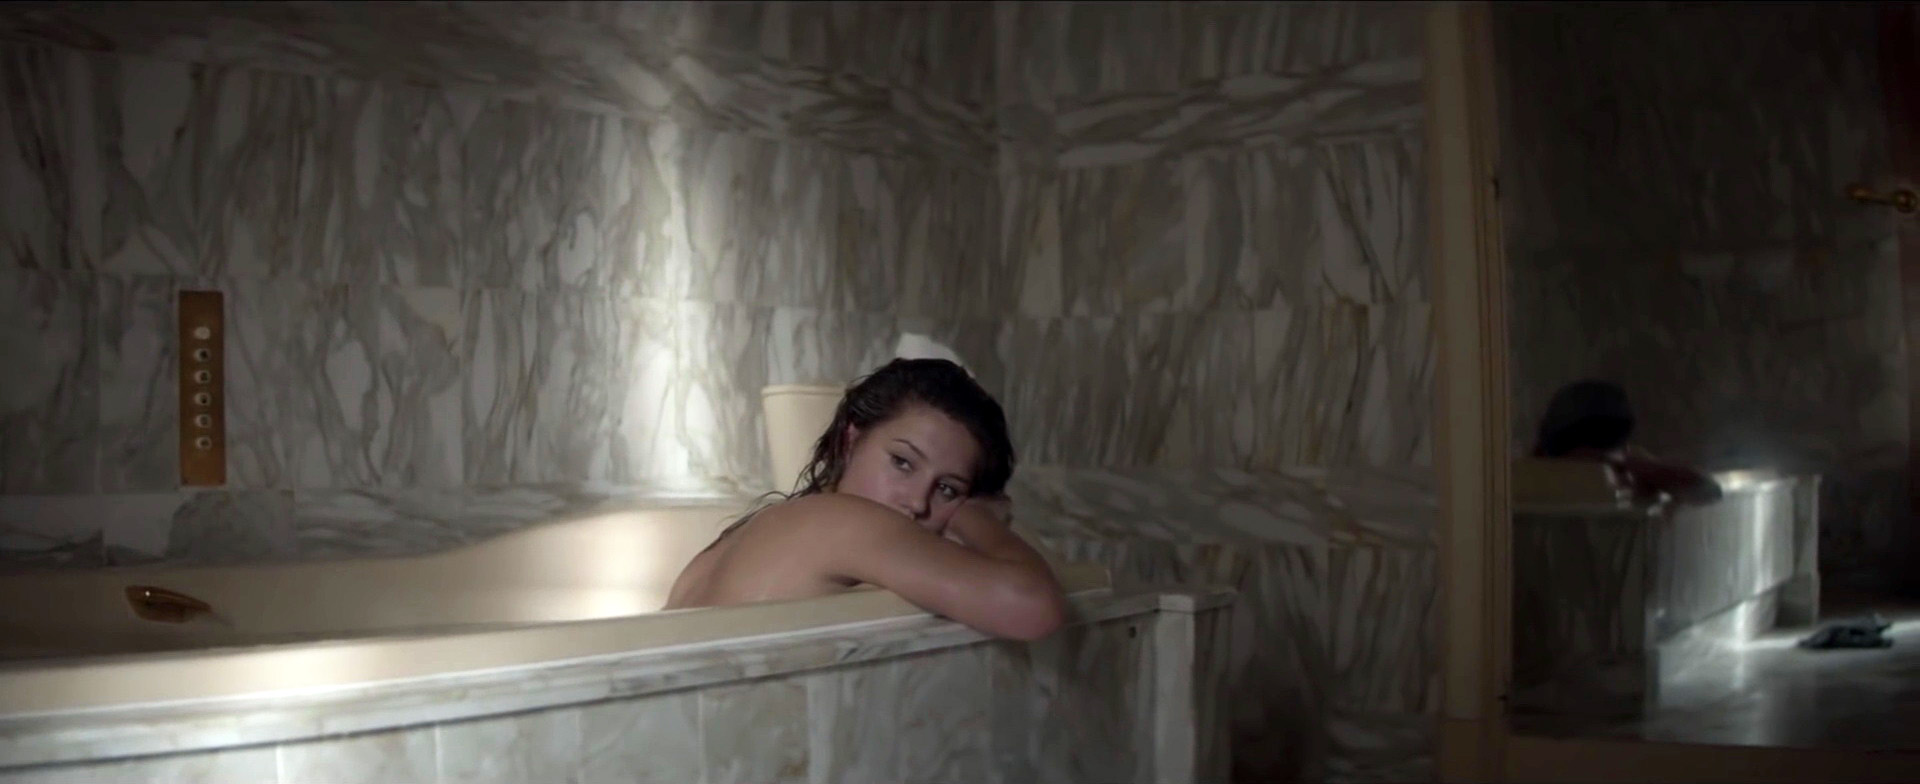 Adele Exarchopoulos - Fire (2015) HD 1080p